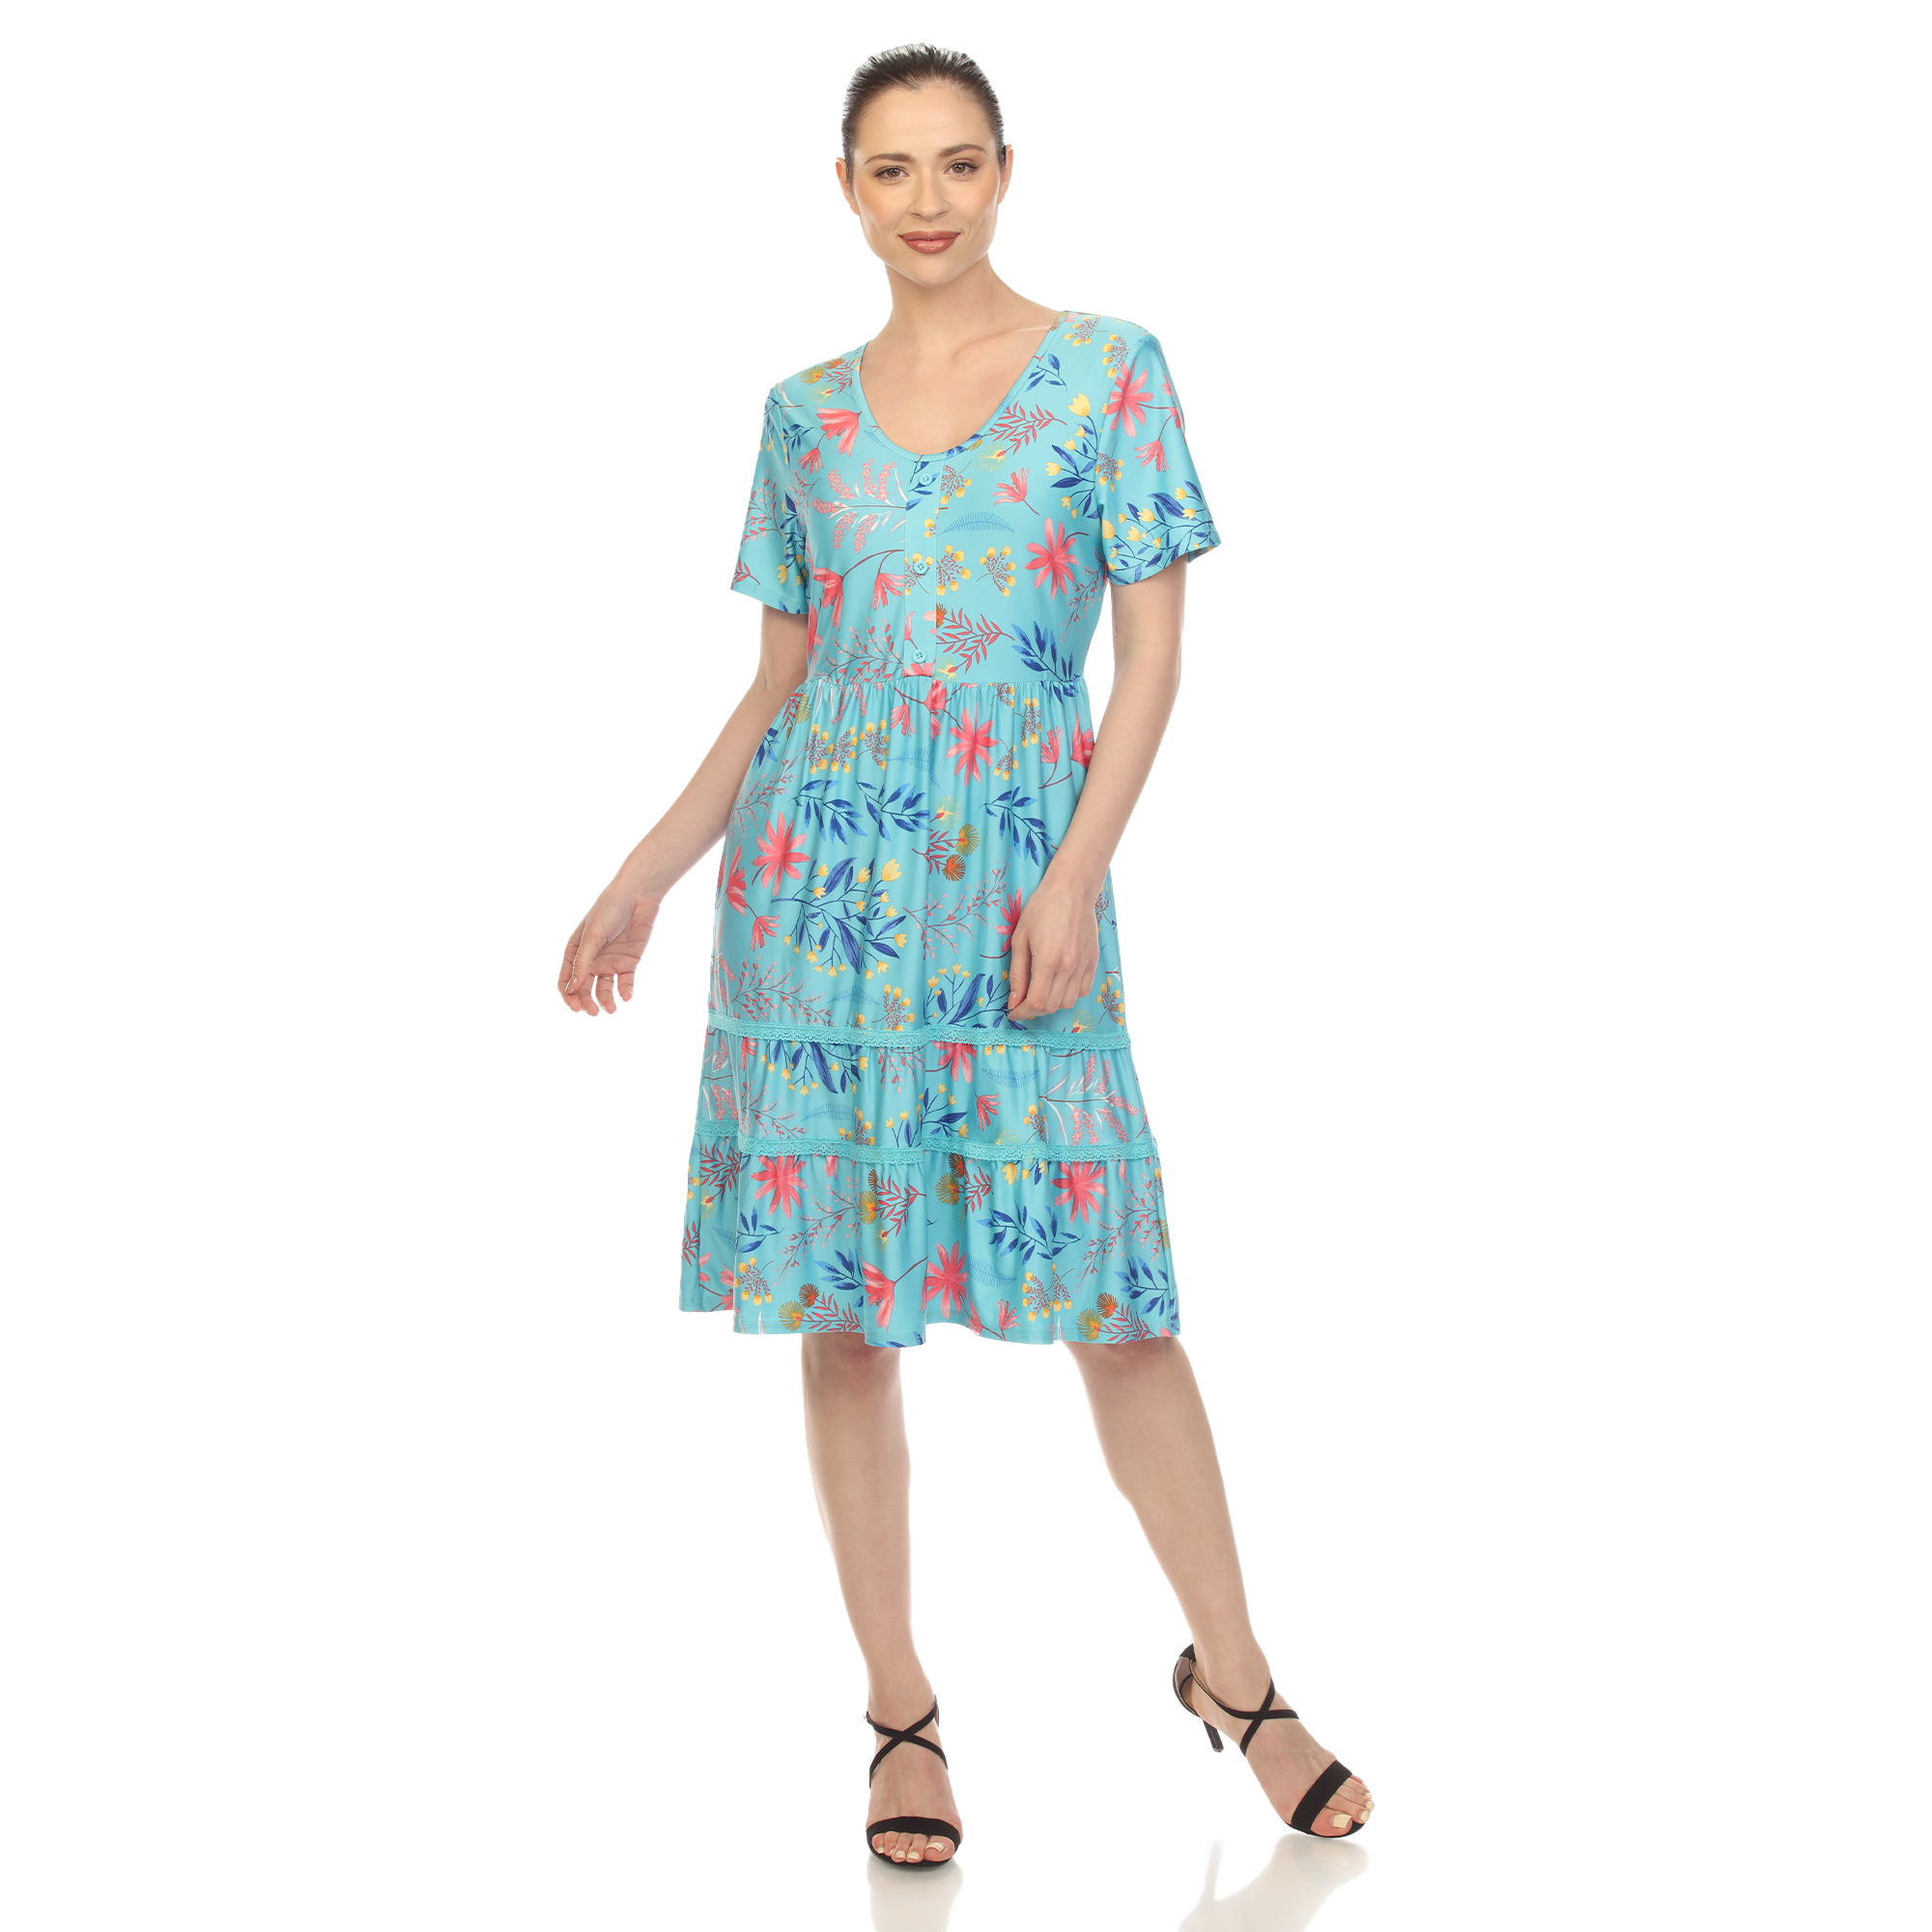 White Mark Women's Floral Short Sleeve Knee Length Tiered Dress - Blue, Large